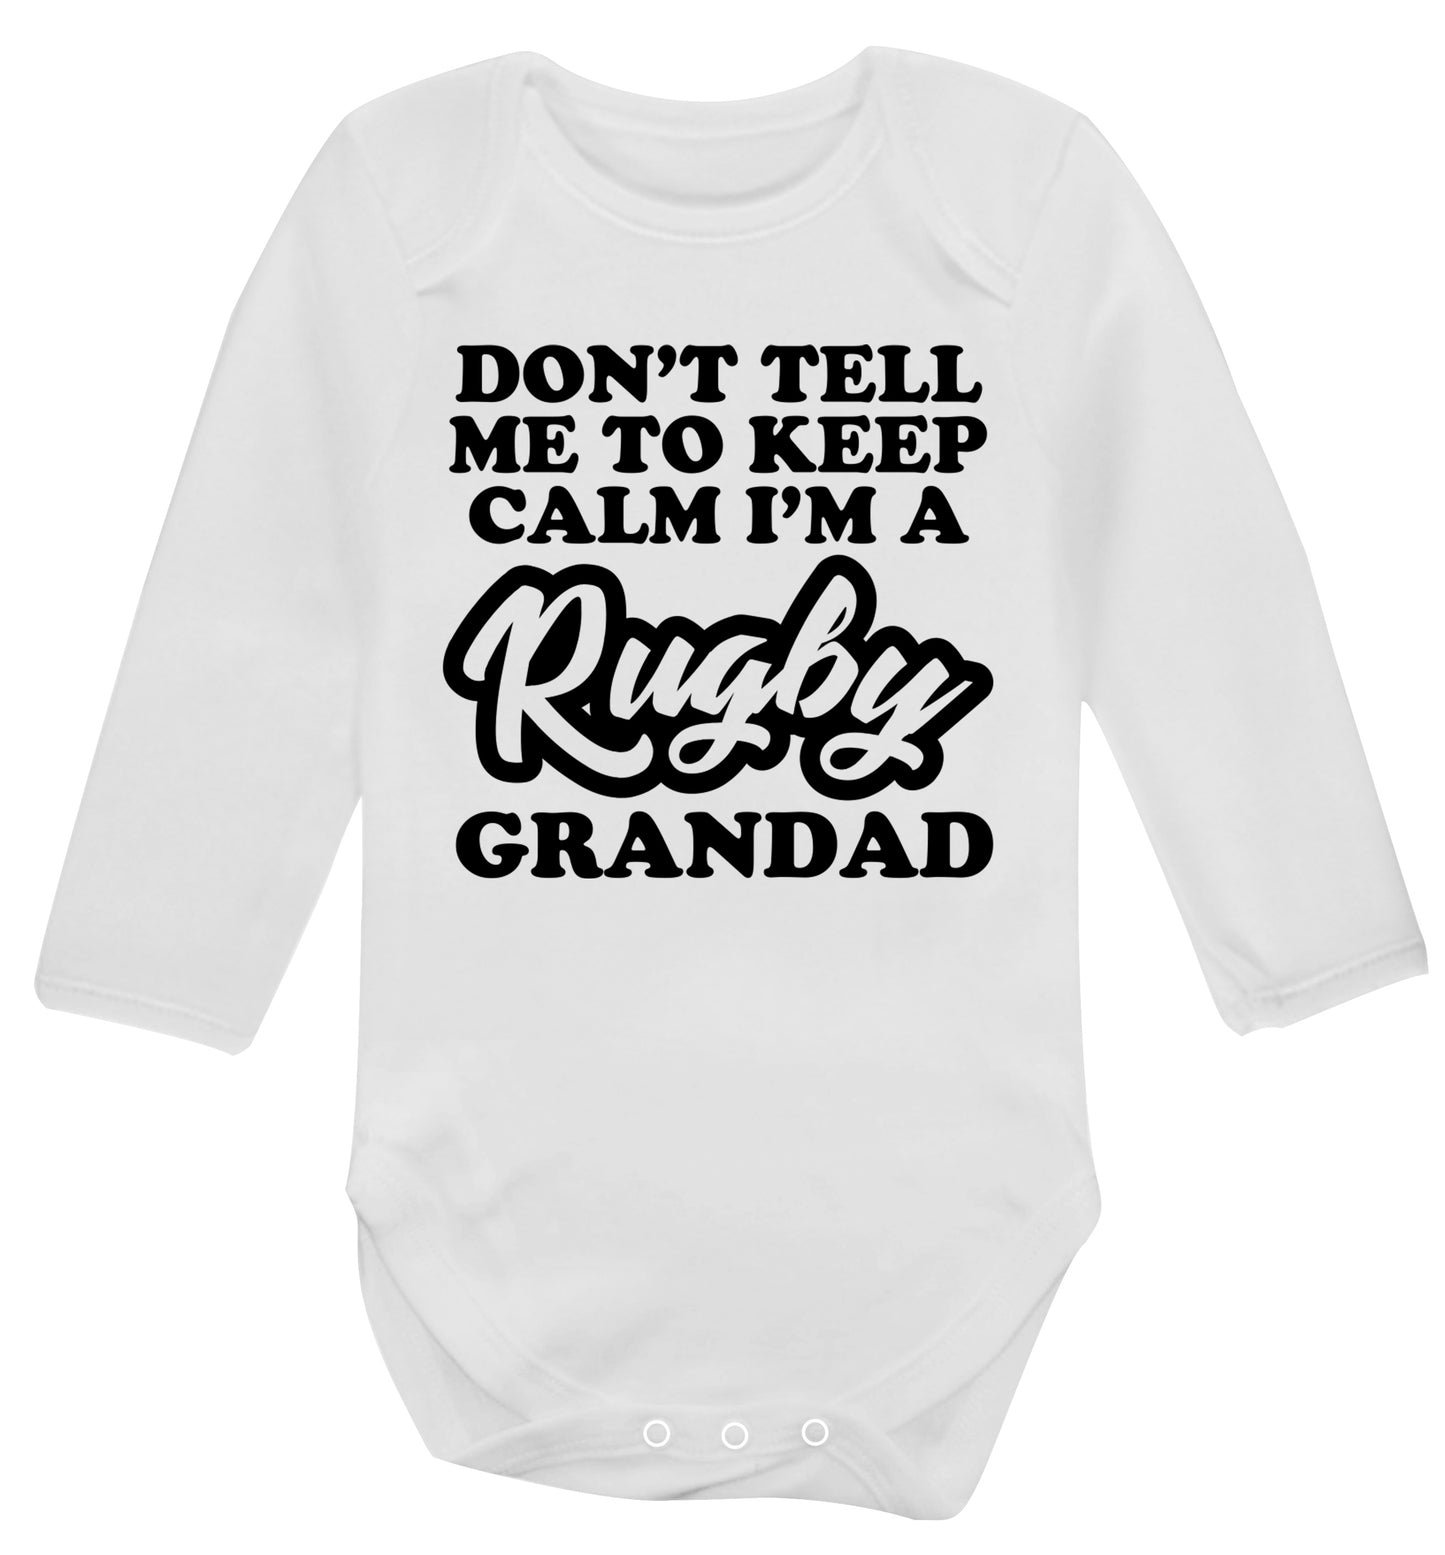 Don't tell me to keep calm I'm a rugby dad Baby Vest long sleeved white 6-12 months